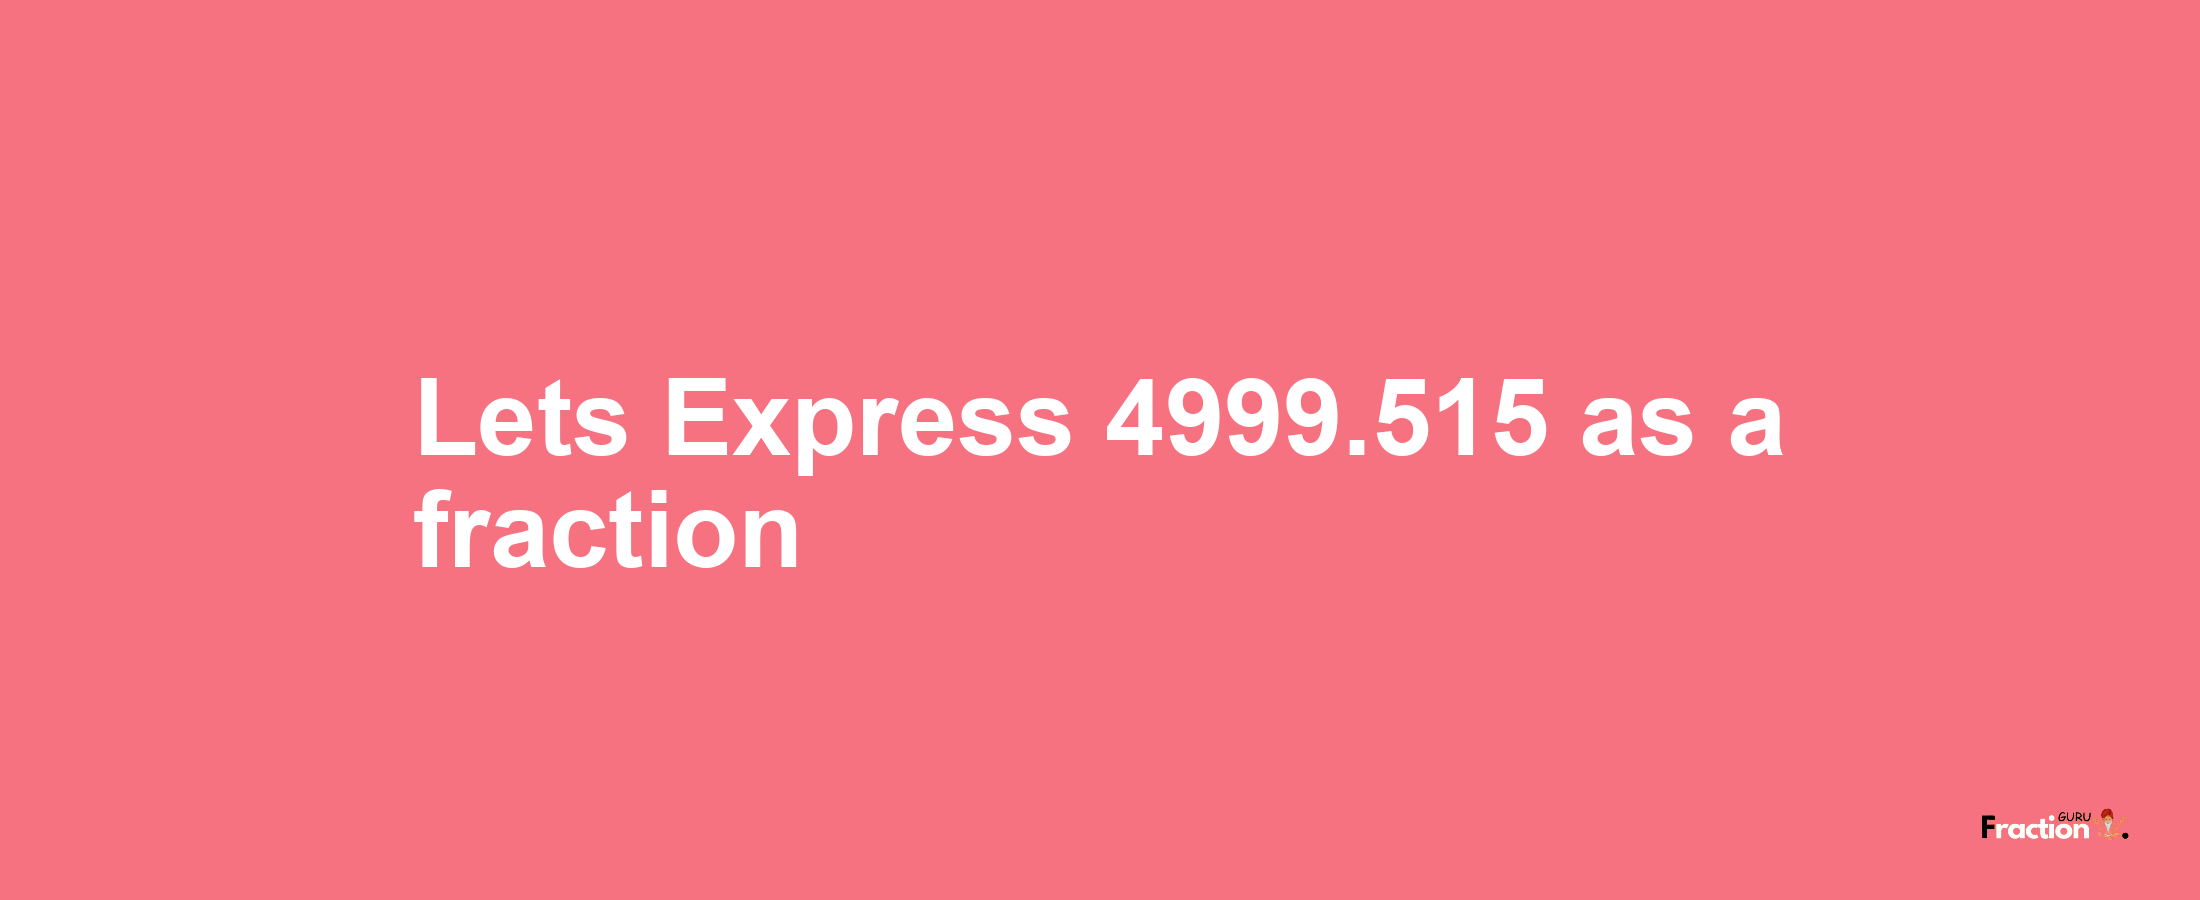 Lets Express 4999.515 as afraction